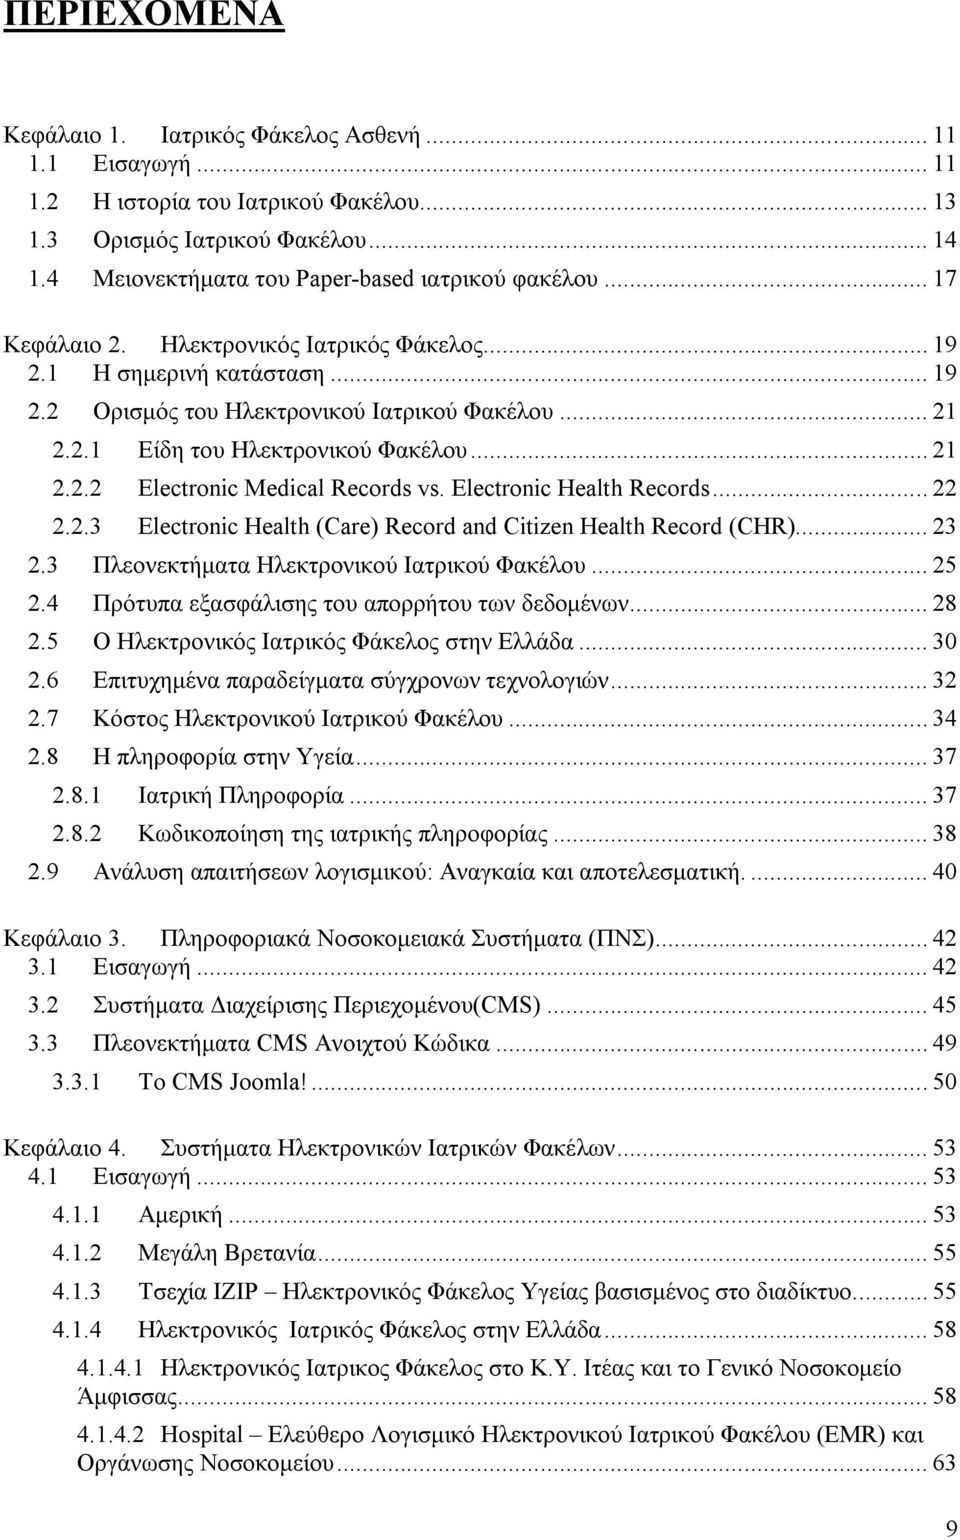 Electronic Health Records... 22 2.2.3 Electronic Health (Care) Record and Citizen Health Record (CHR)... 23 2.3 Πλεονεκτήματα Ηλεκτρονικού Ιατρικού Φακέλου... 25 2.